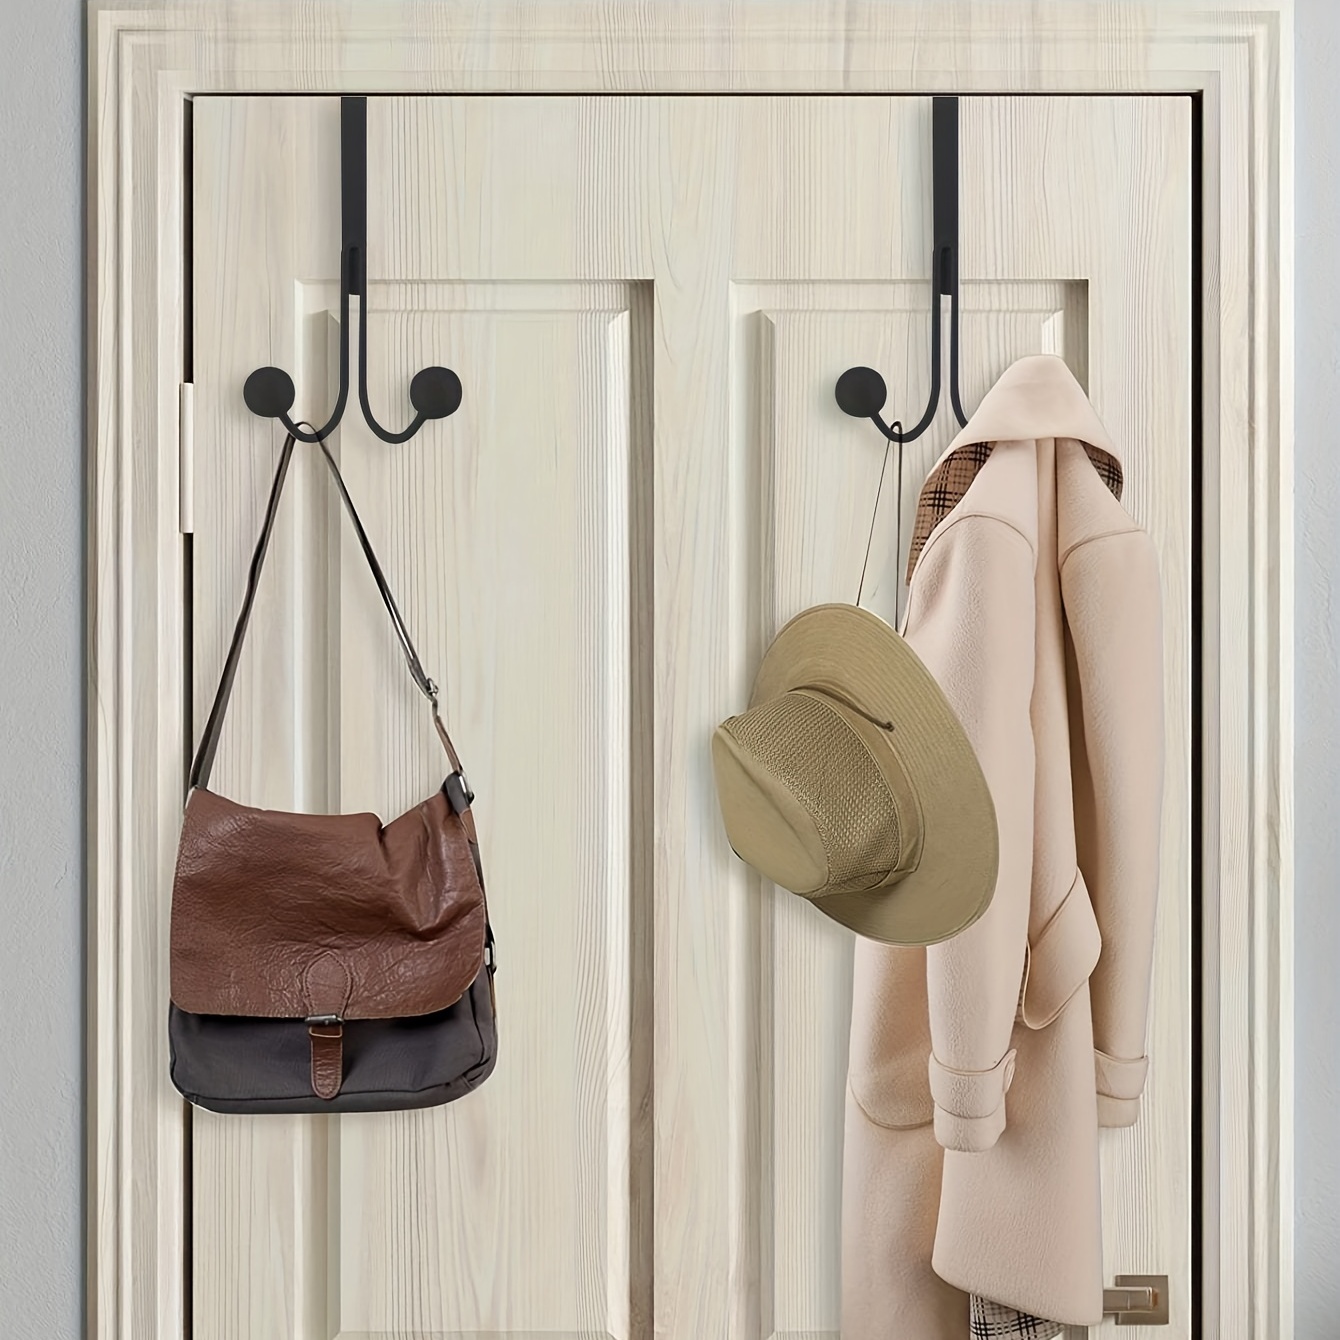 Organize Your Home with This Double Over-the-Door Hanger Hook - Perfect for  Coats, Hats, Robes, and Towels!